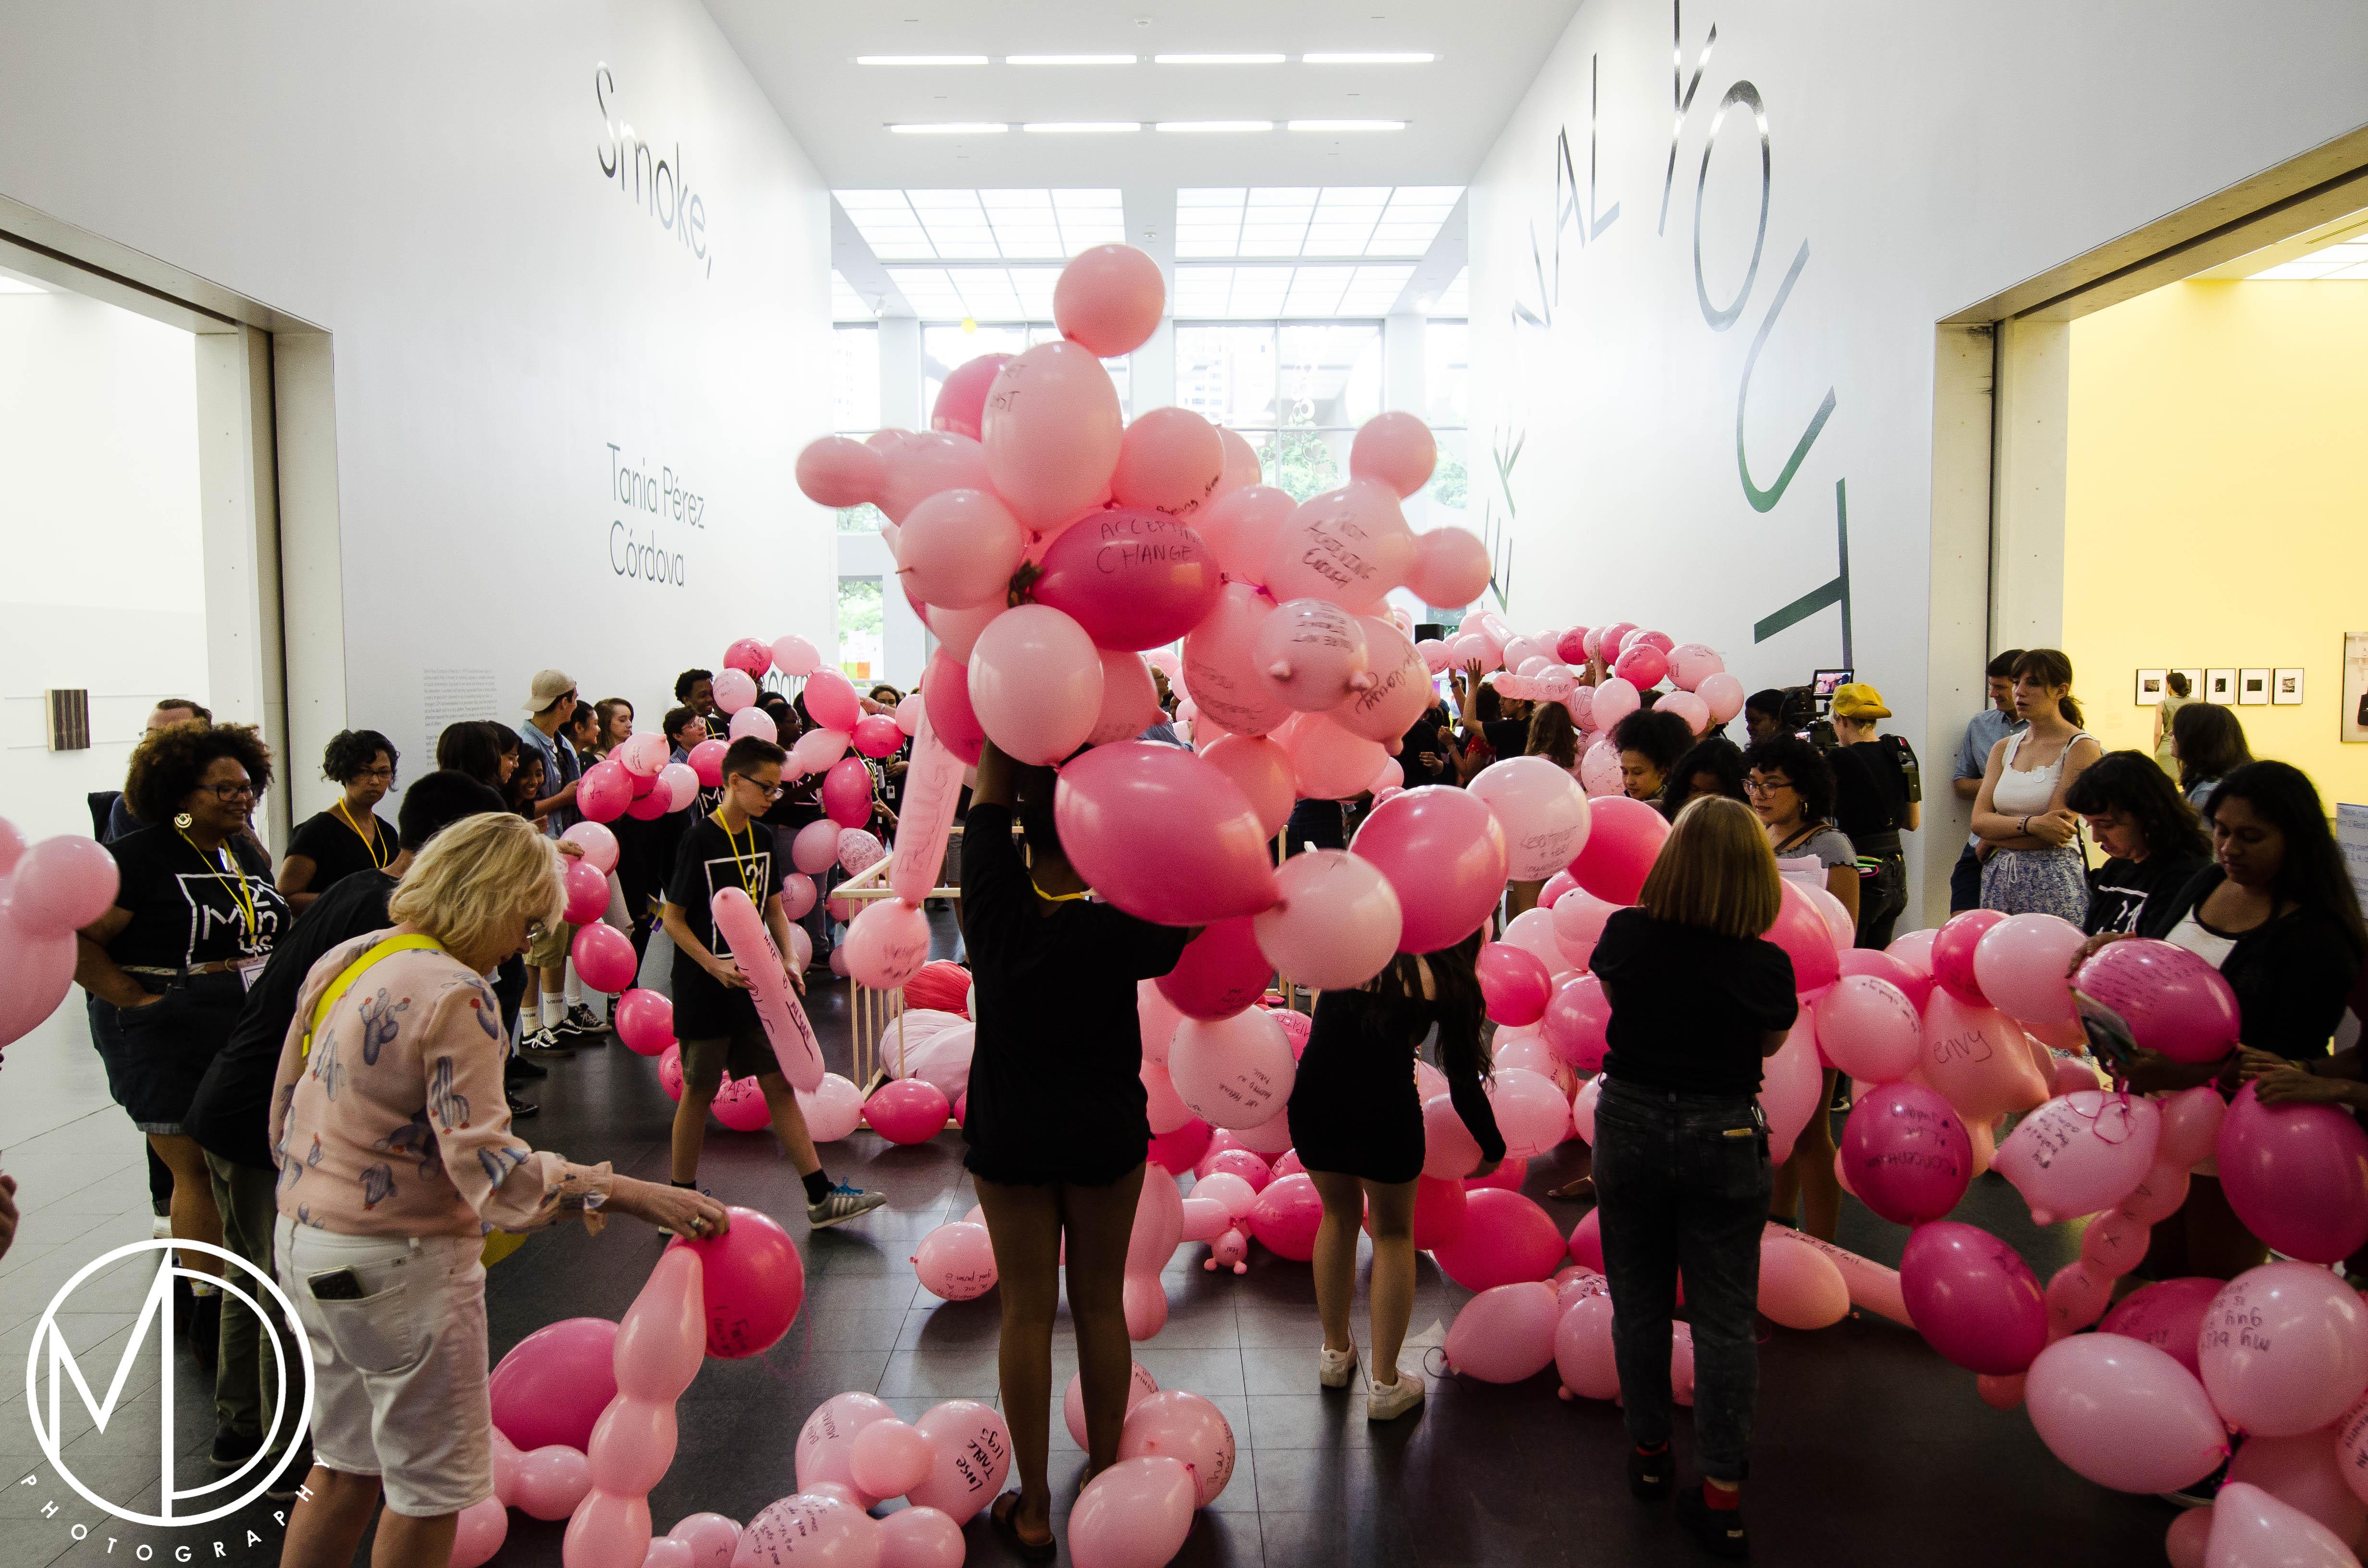 A young person's back is to us as they lift a cluster of pink balloons over their head in the MCA's atrium. Surrounding them are a sea of balloons and people doing similar playful motions.